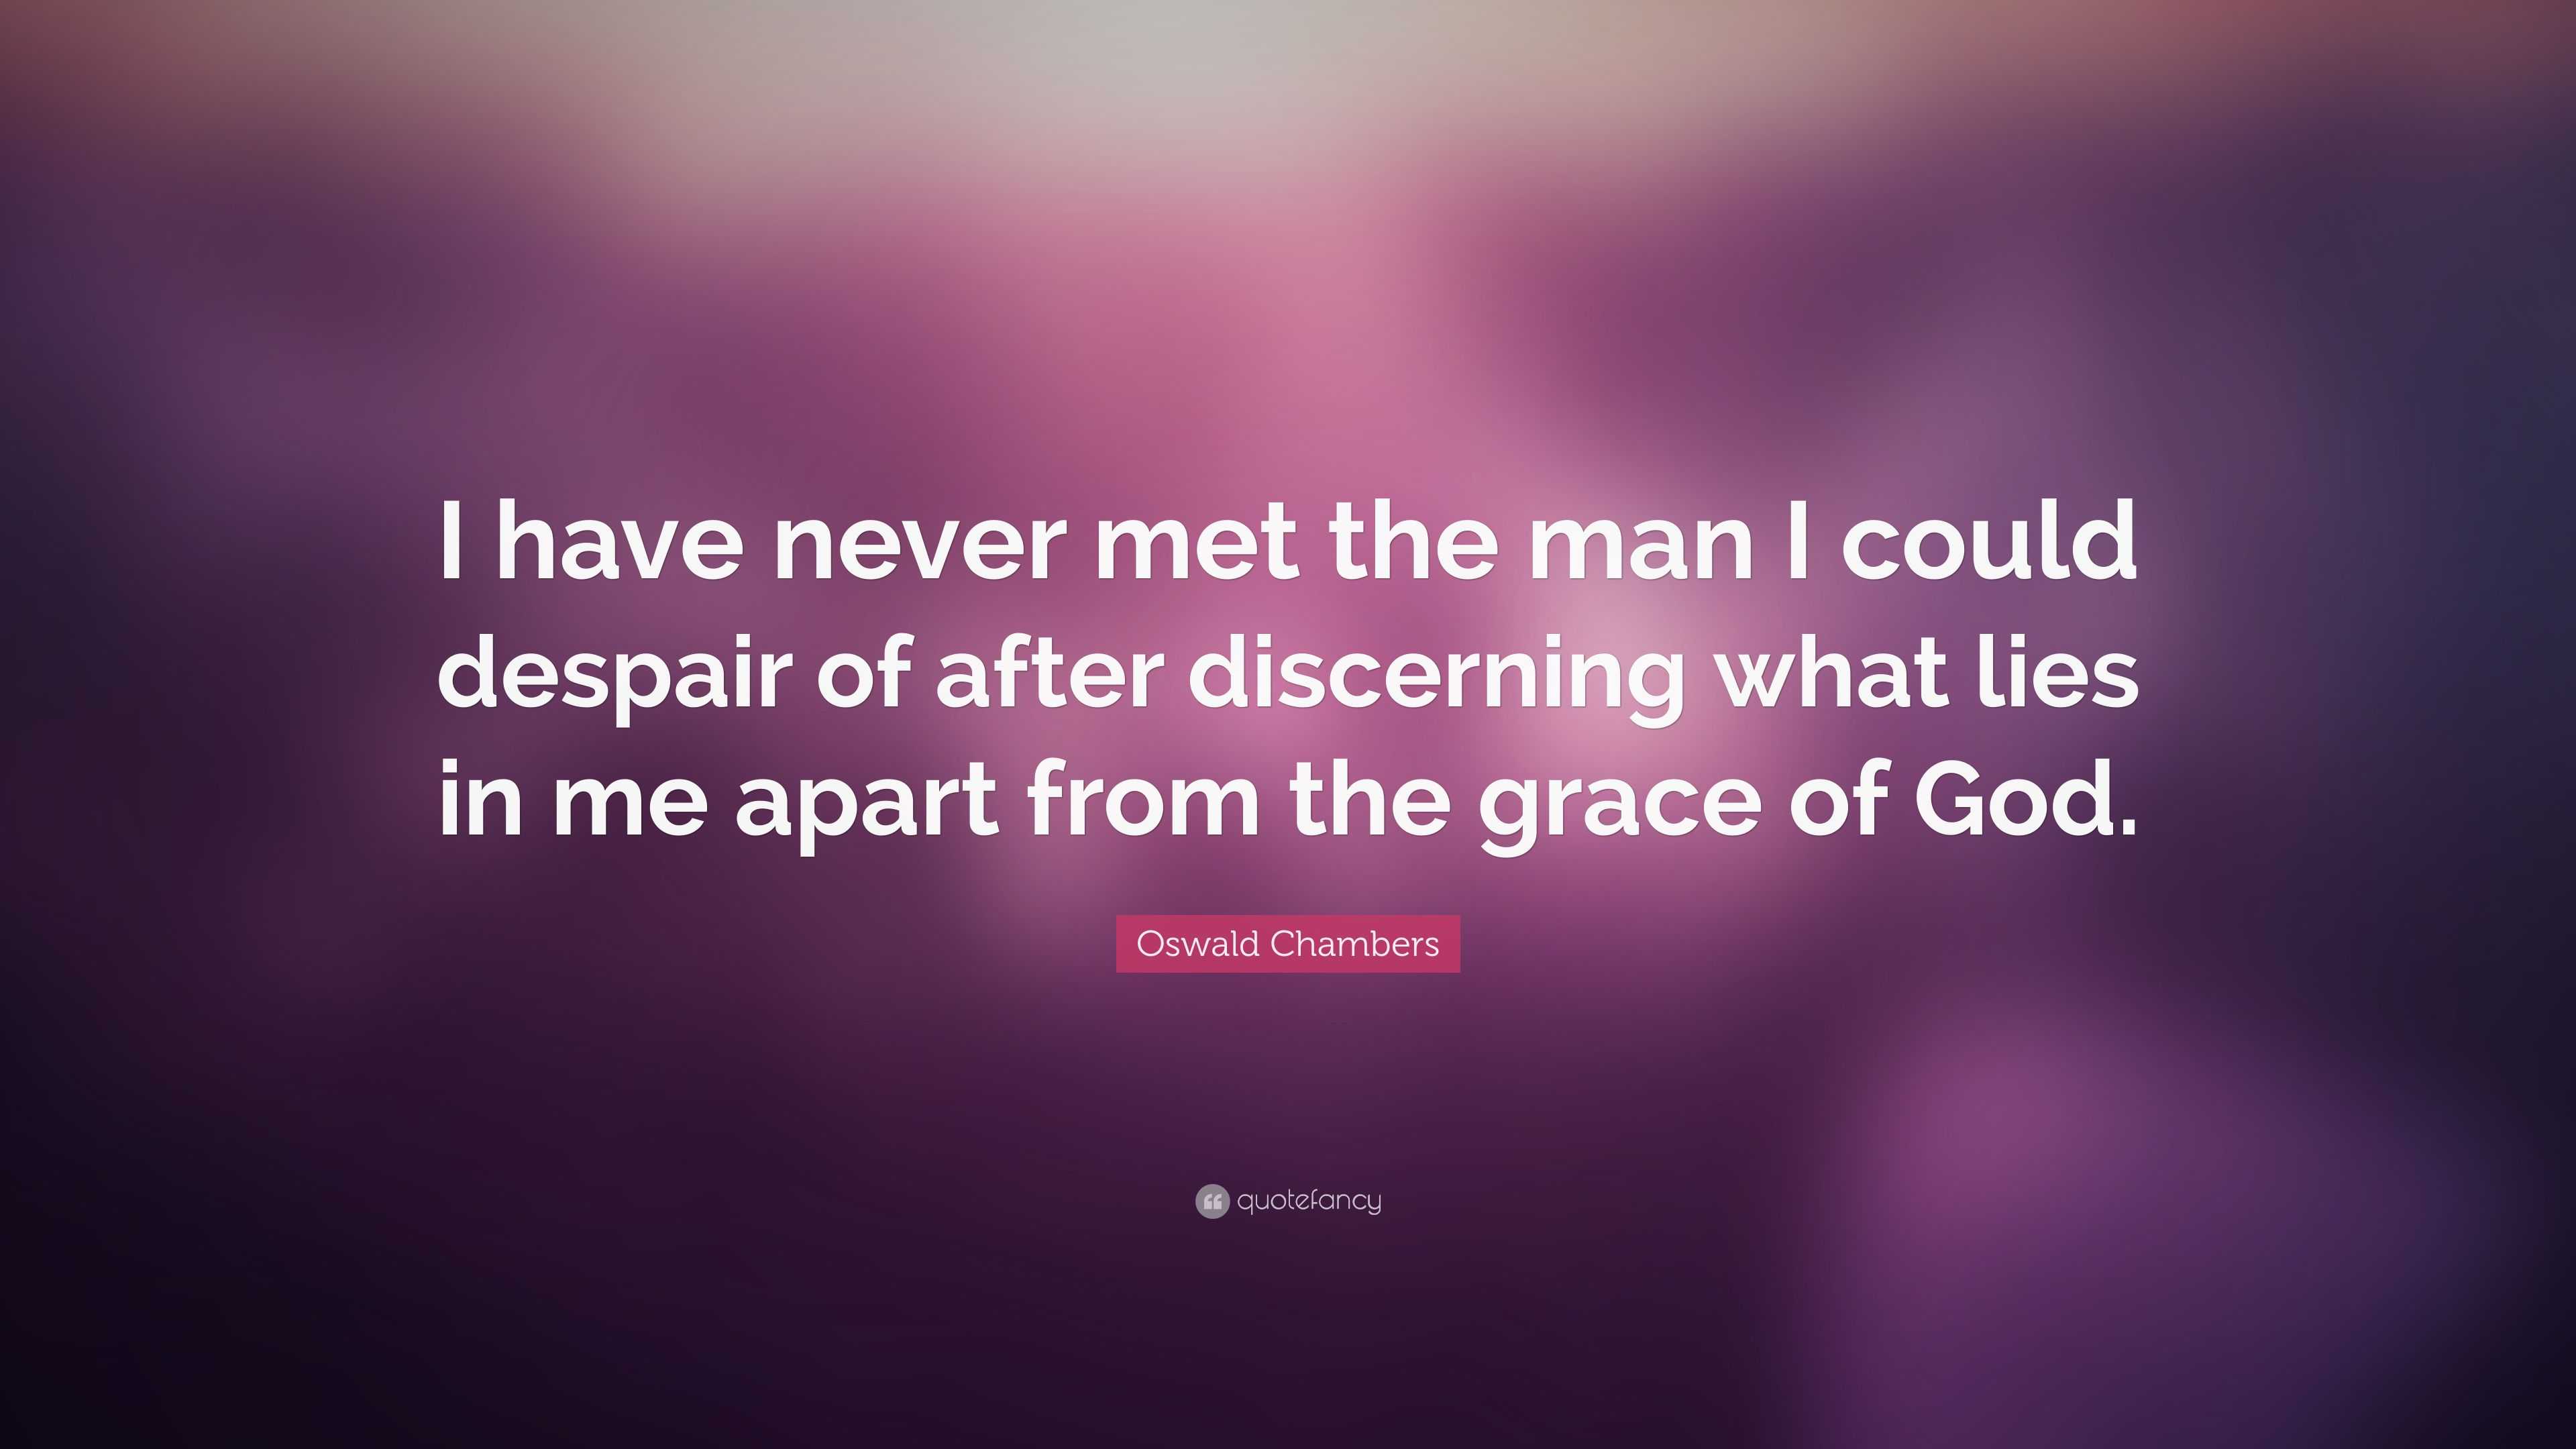 Oswald Chambers Quote: "I have never met the man I could ...